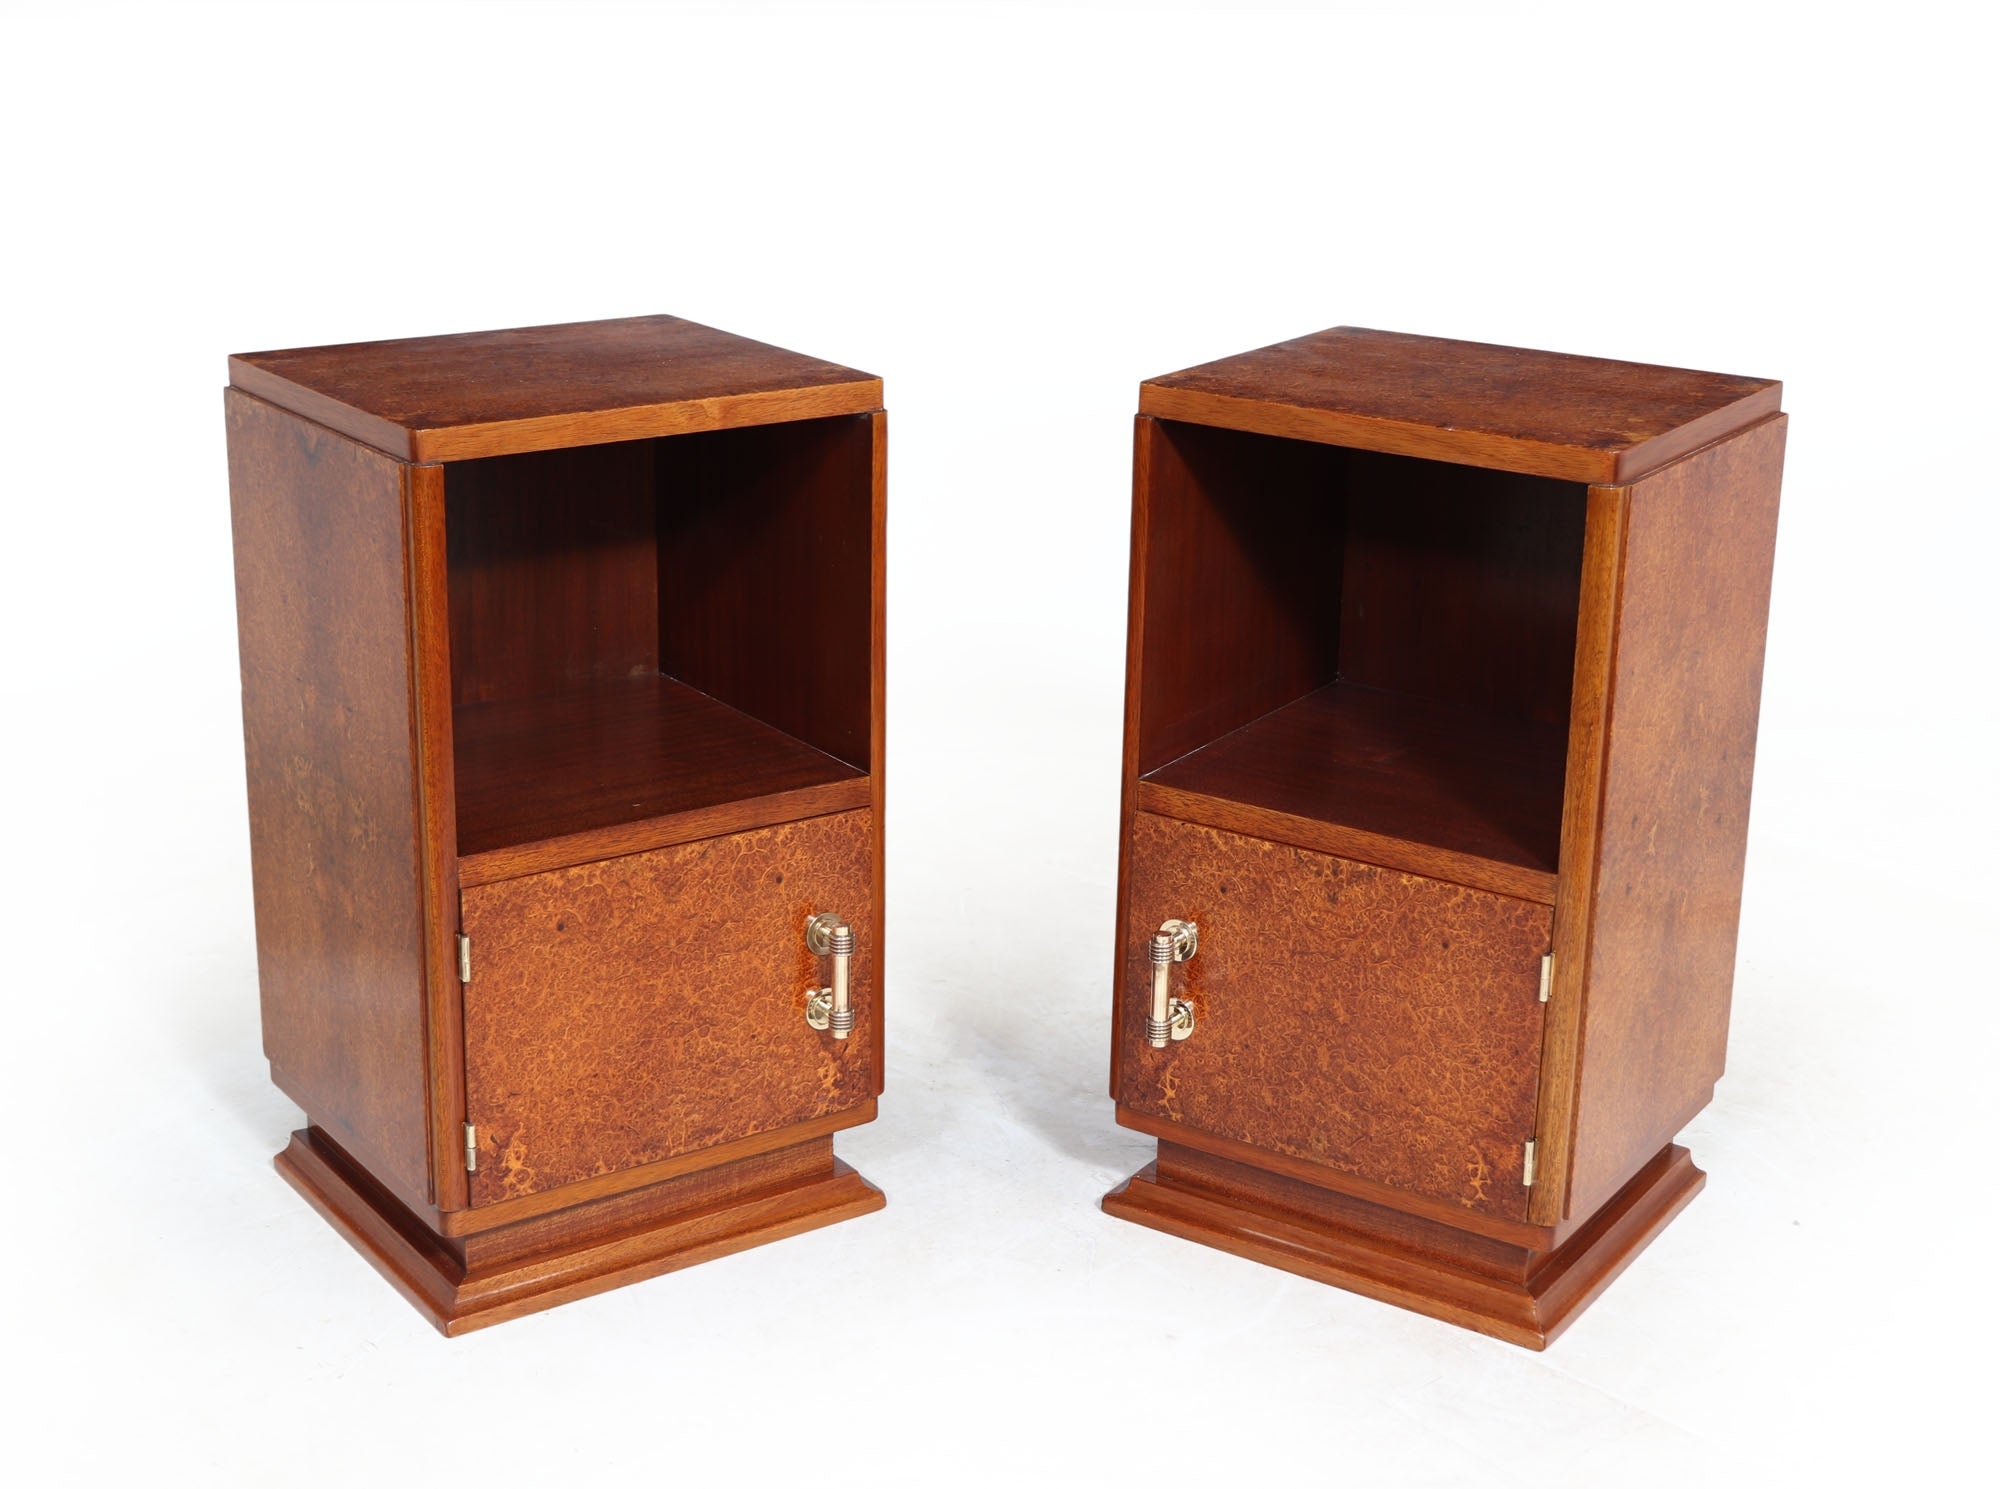 Pair of French Art Deco Bedside Cabinets in Amboyna – The Furniture Rooms